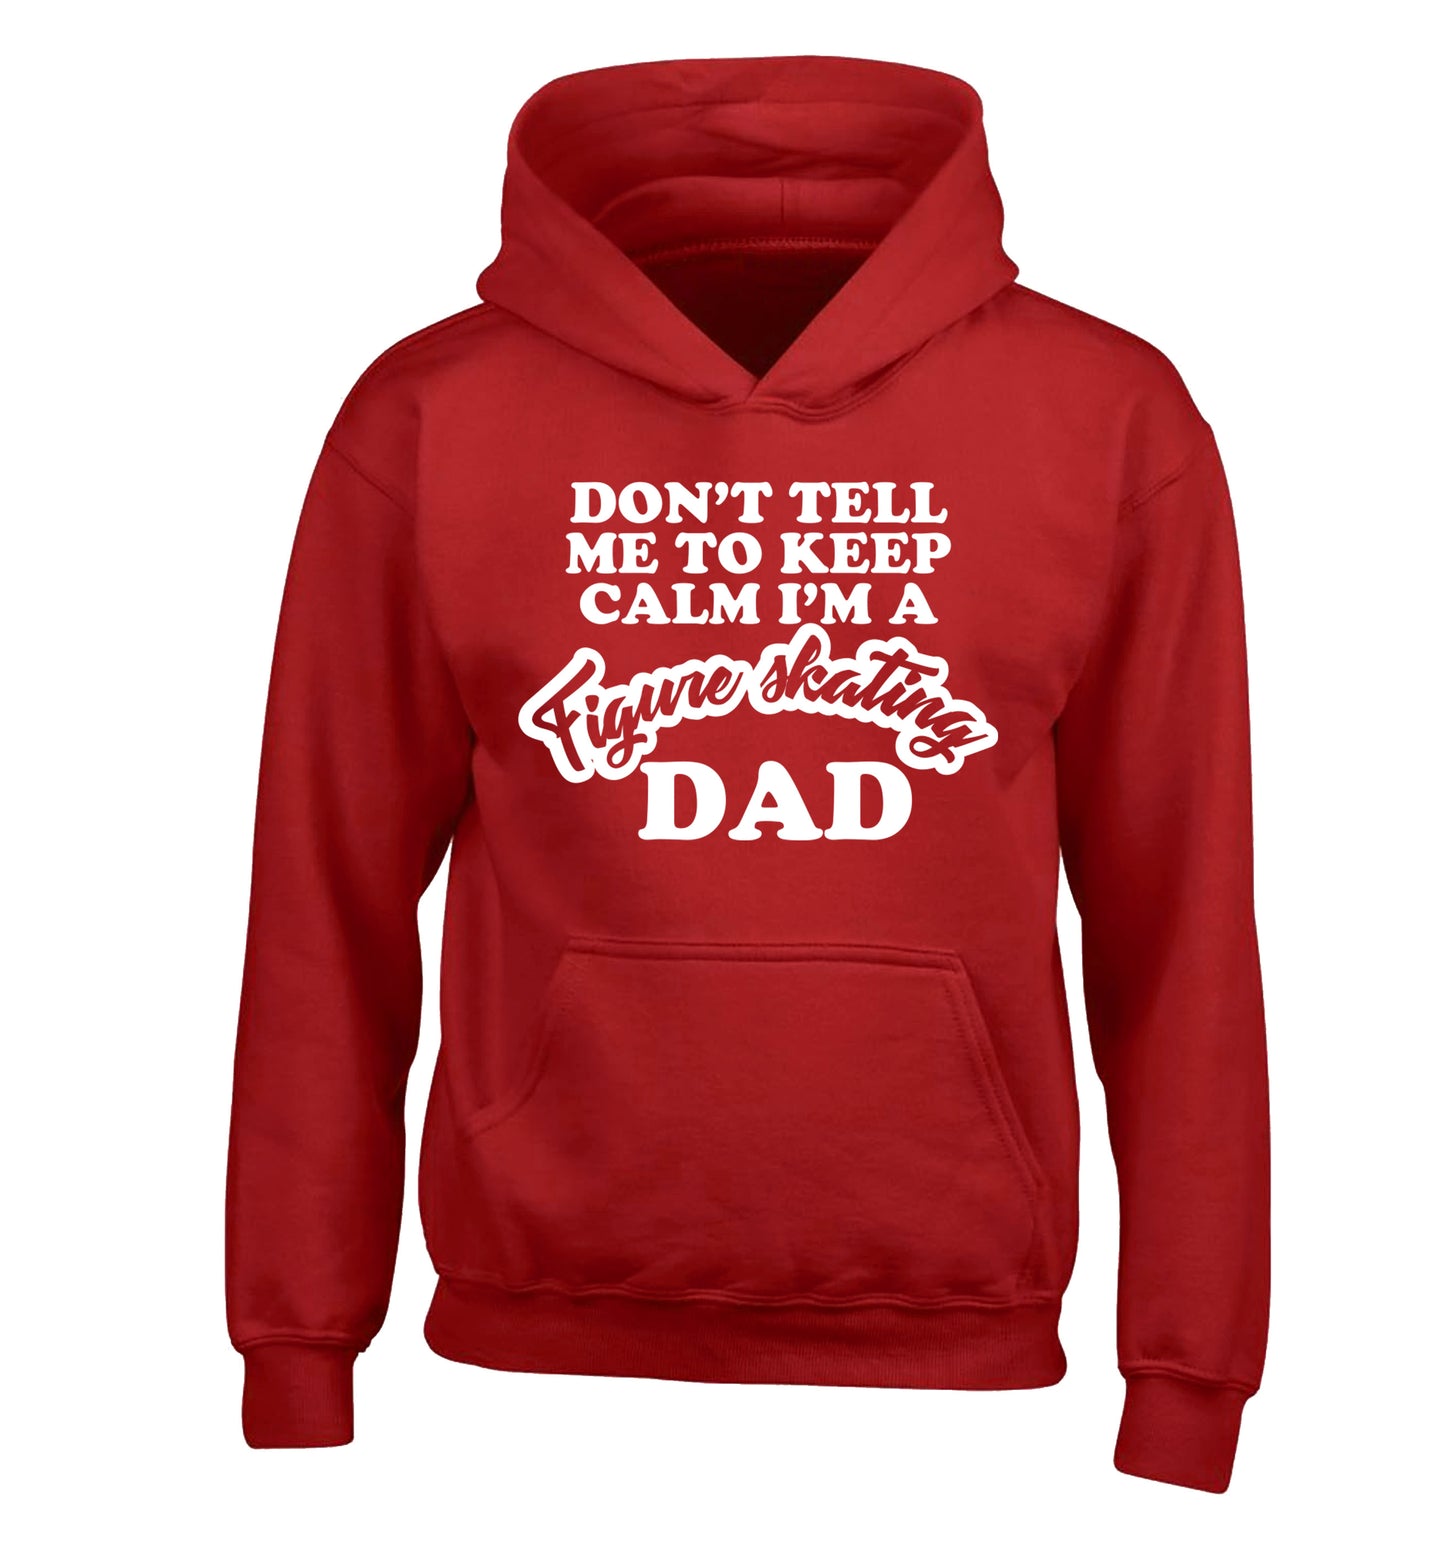 Don't tell me to keep calm I'm a figure skating dad children's red hoodie 12-14 Years